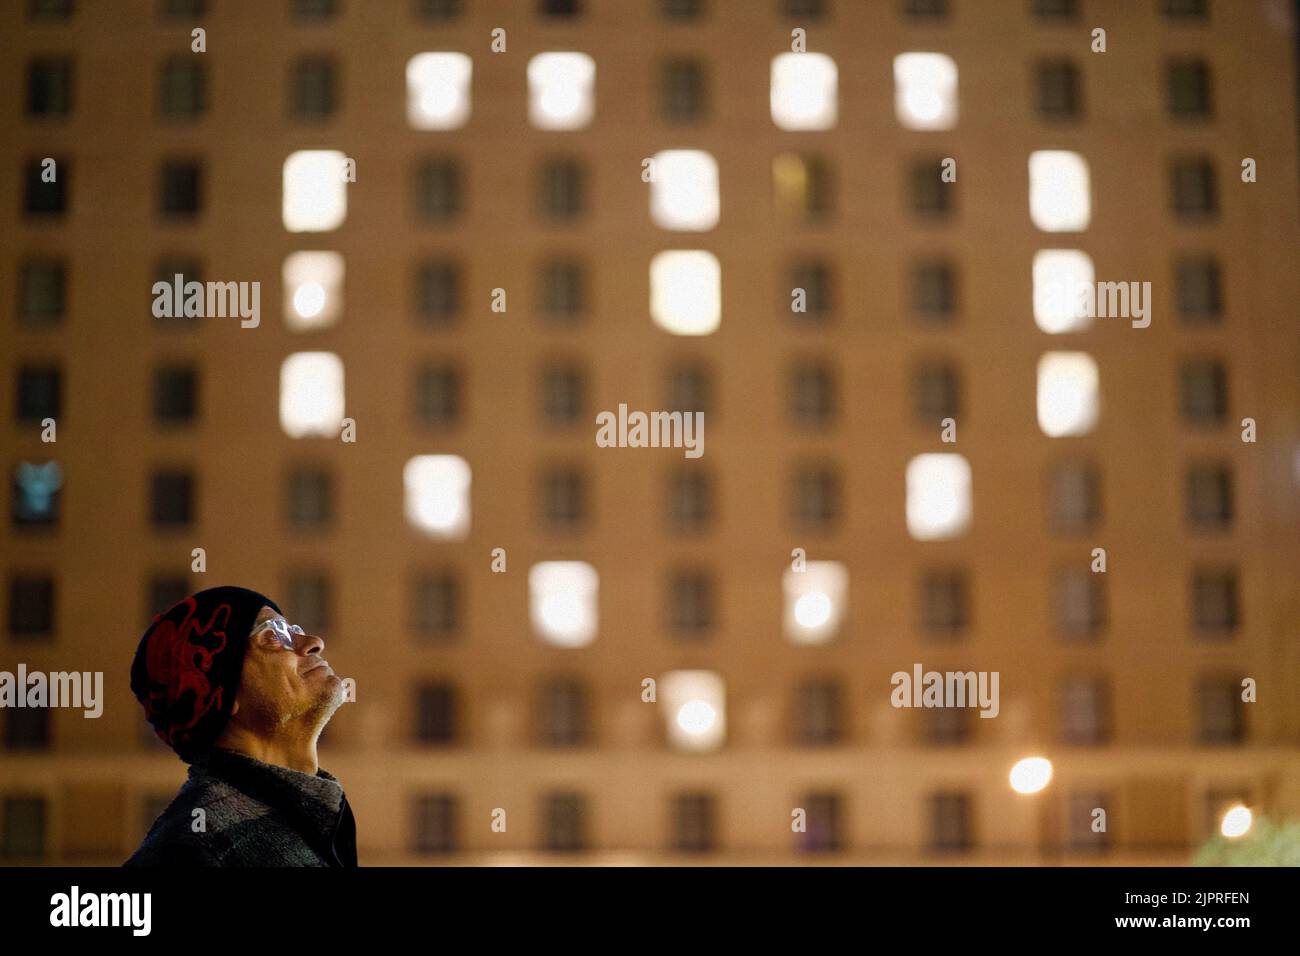 Gerard looks up to a hotel with a heart-shaped pattern of lights. Stock Photo